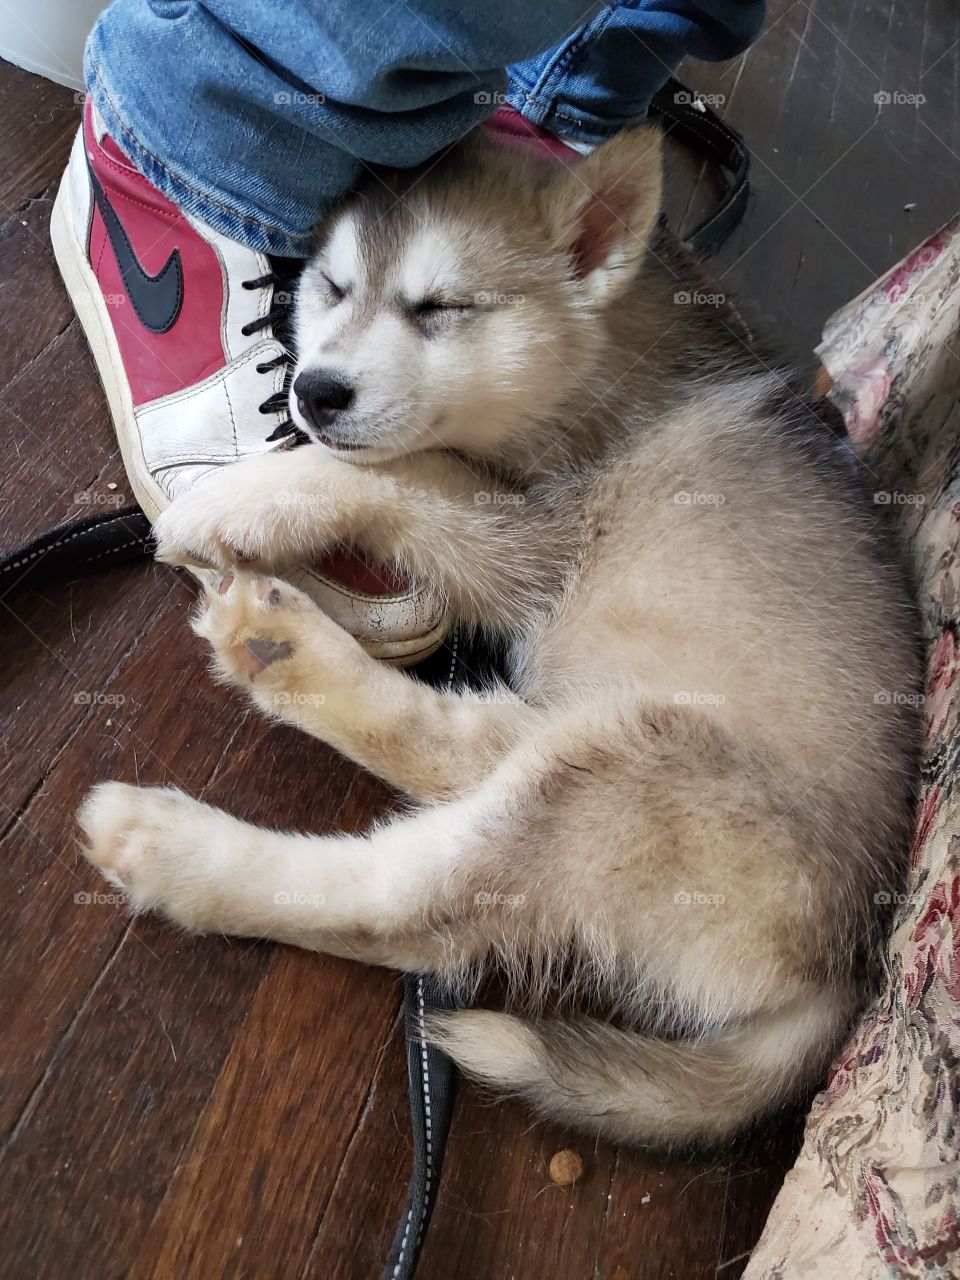 Nyx
AKC Registered Siberian Husky
Passed out after a long walk
Insta: howling_winds_siberians